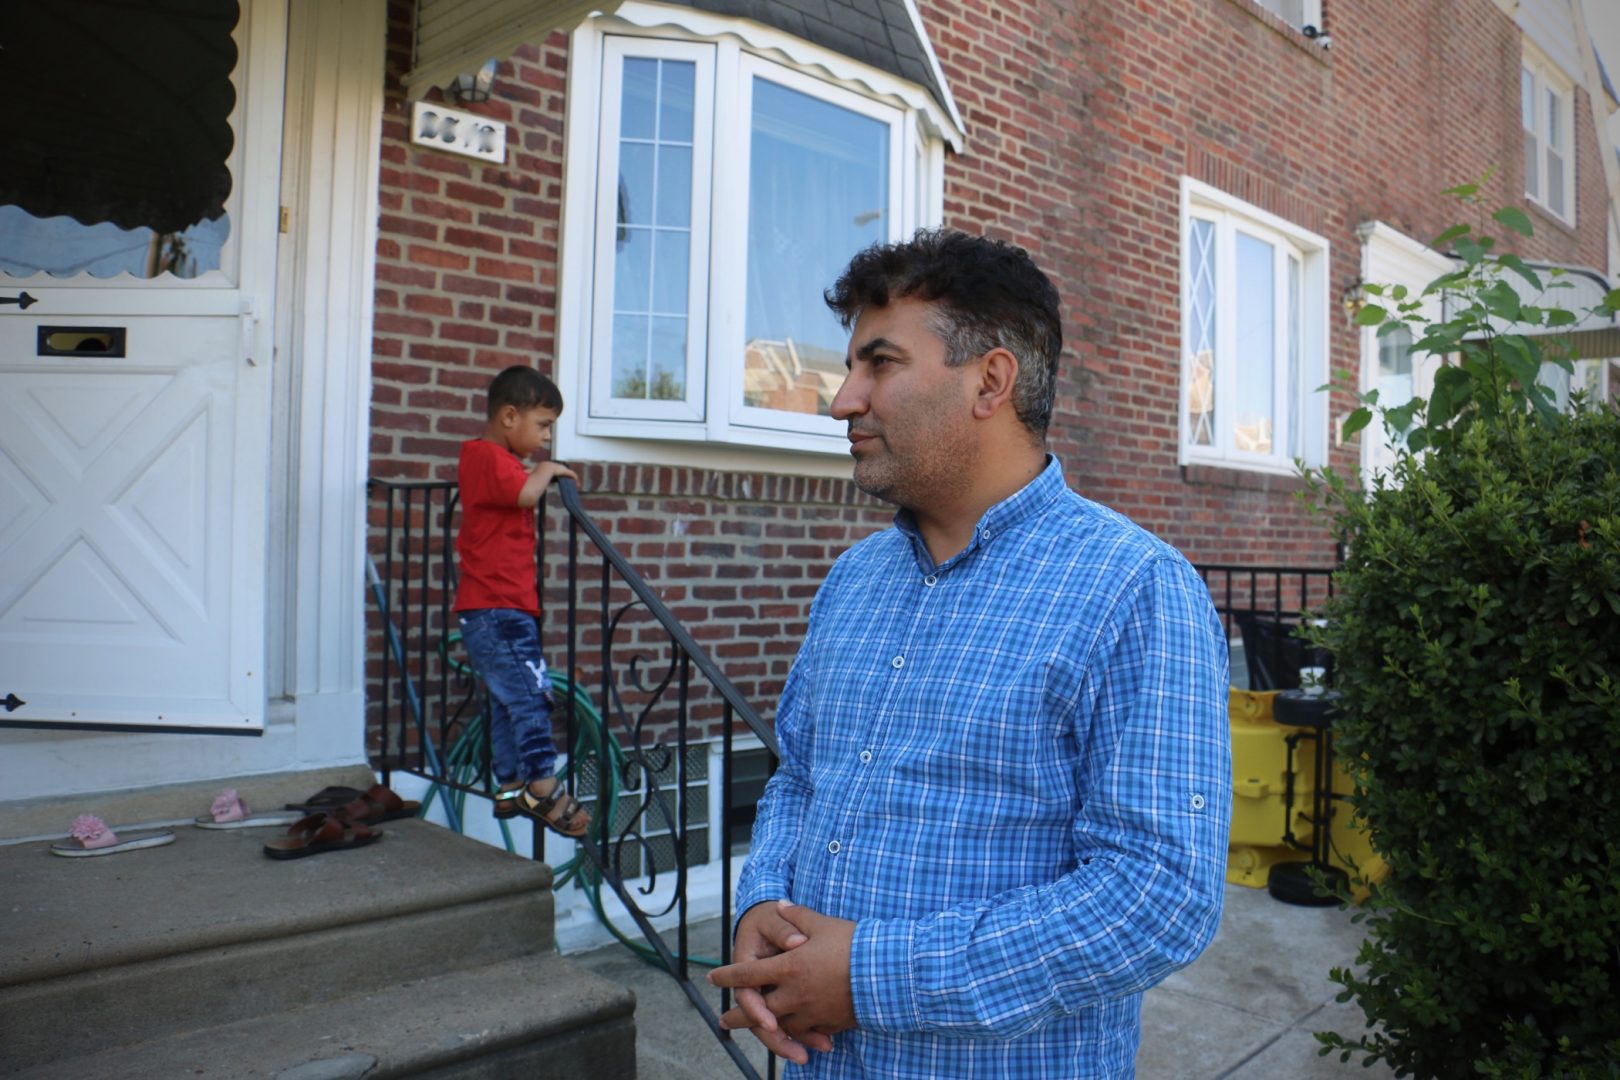 Mohammed Sadeed worked for the U.S. government in Afghanistan before emigrating in 2019. He now lives in Philadelphia and is helping Afghan refugees arriving at the Philadelphia airport.